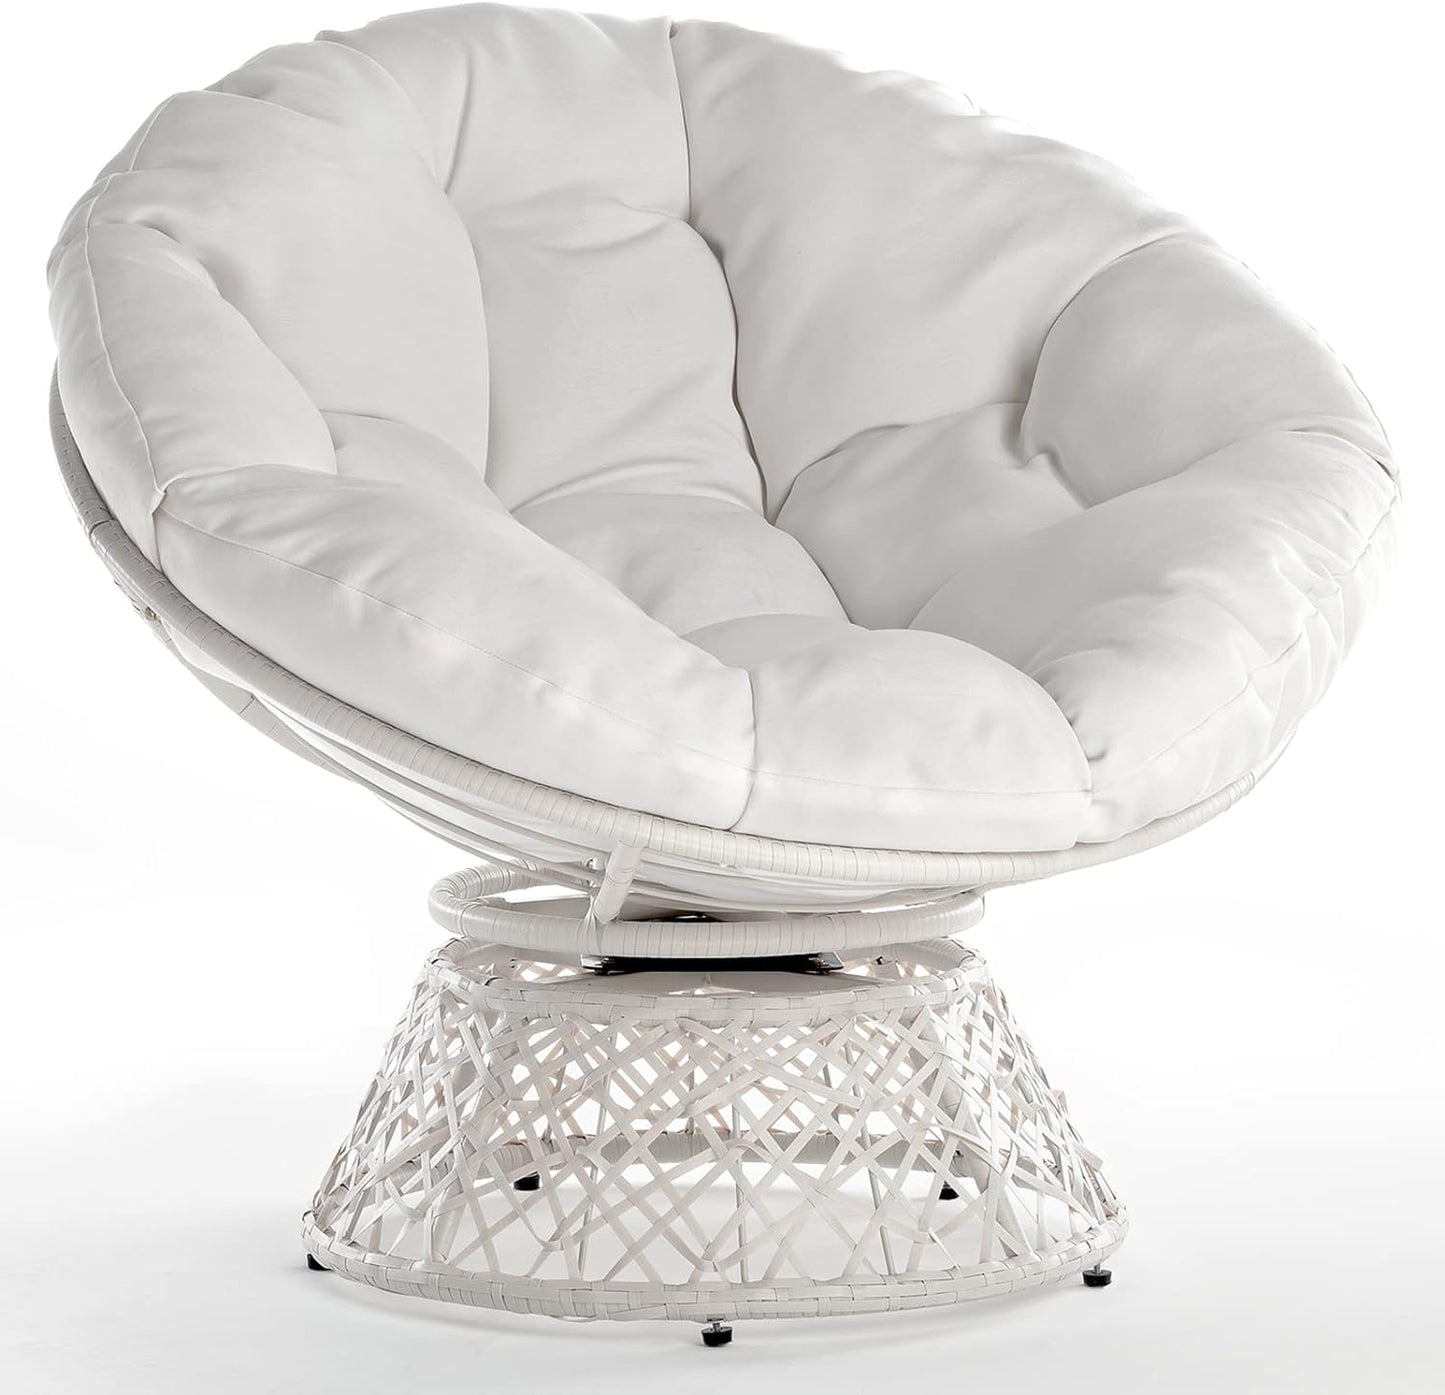 Ergonomic Wicker Papasan Chair with Soft Thick Density Fabric Cushion, High Capacity Steel Frame, 360 Degree Swivel for Living, Bedroom, Reading Room, Lounge, Arctic Snow - White Base